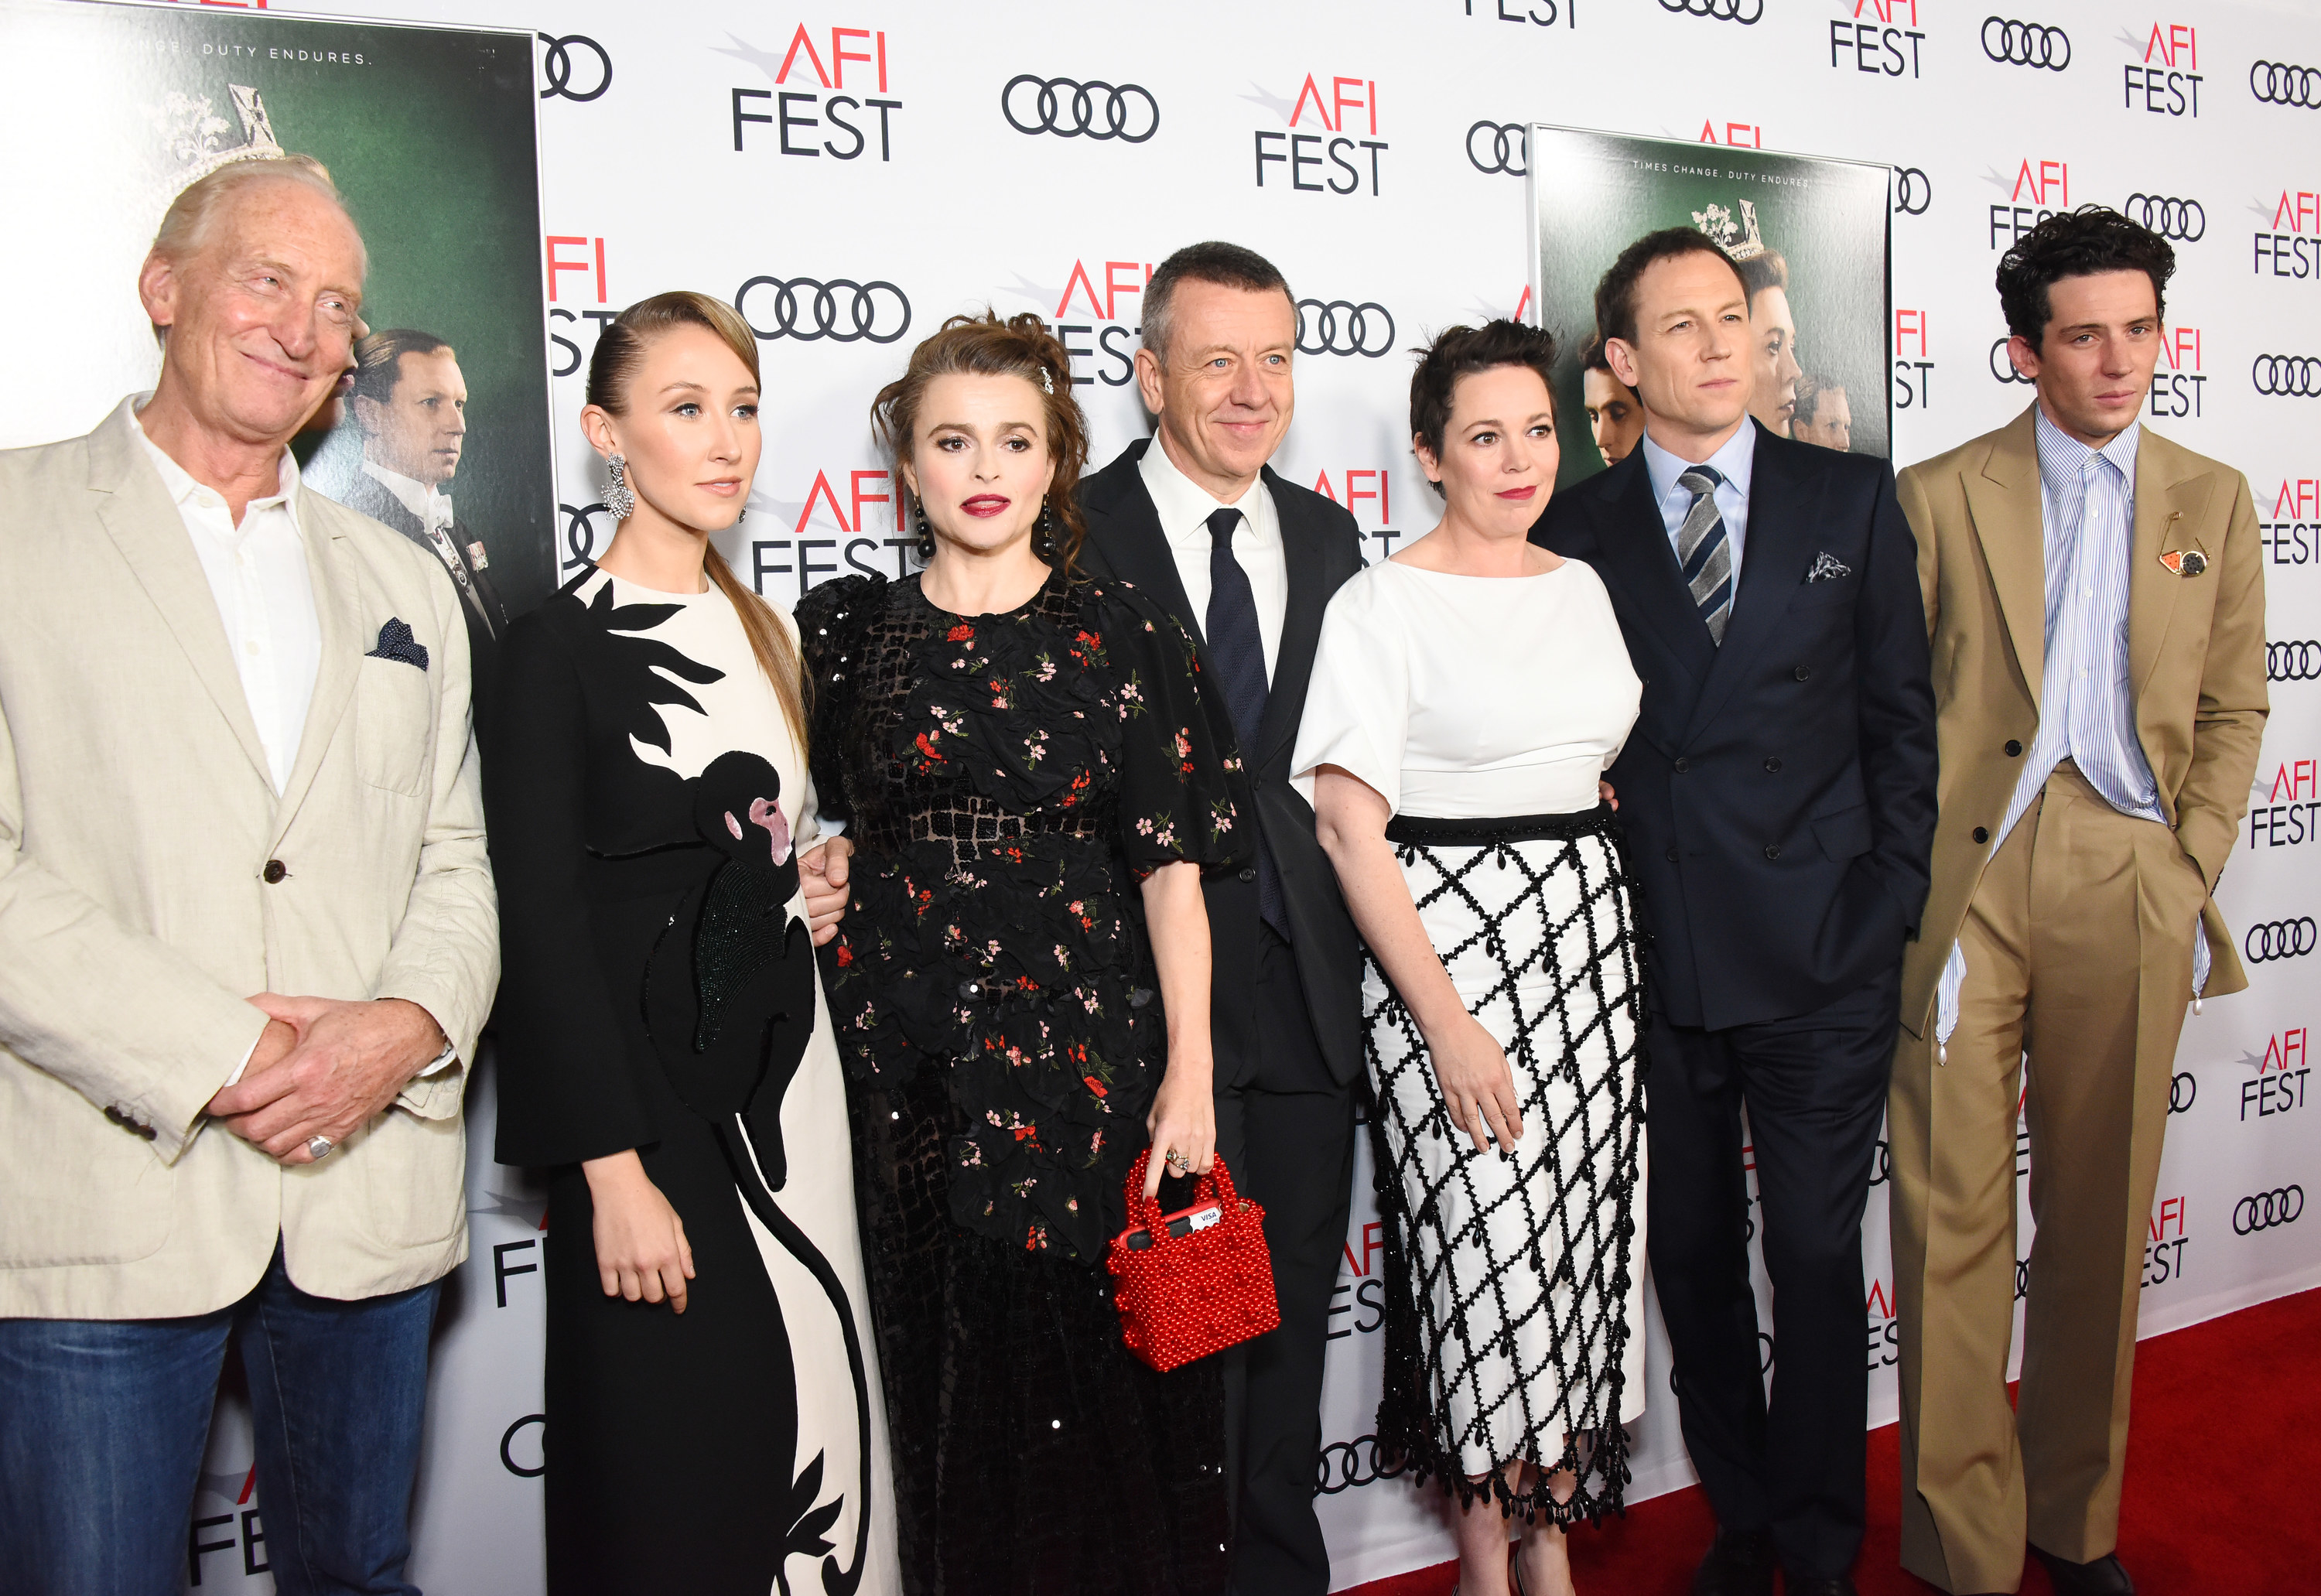 Charles Dance, Erin Doherty, Helena Bonham Carter, Peter Morgan, Olivia Colman, Tobias Menzies, and Josh O&#x27;Connor are photographed at a red carpet event